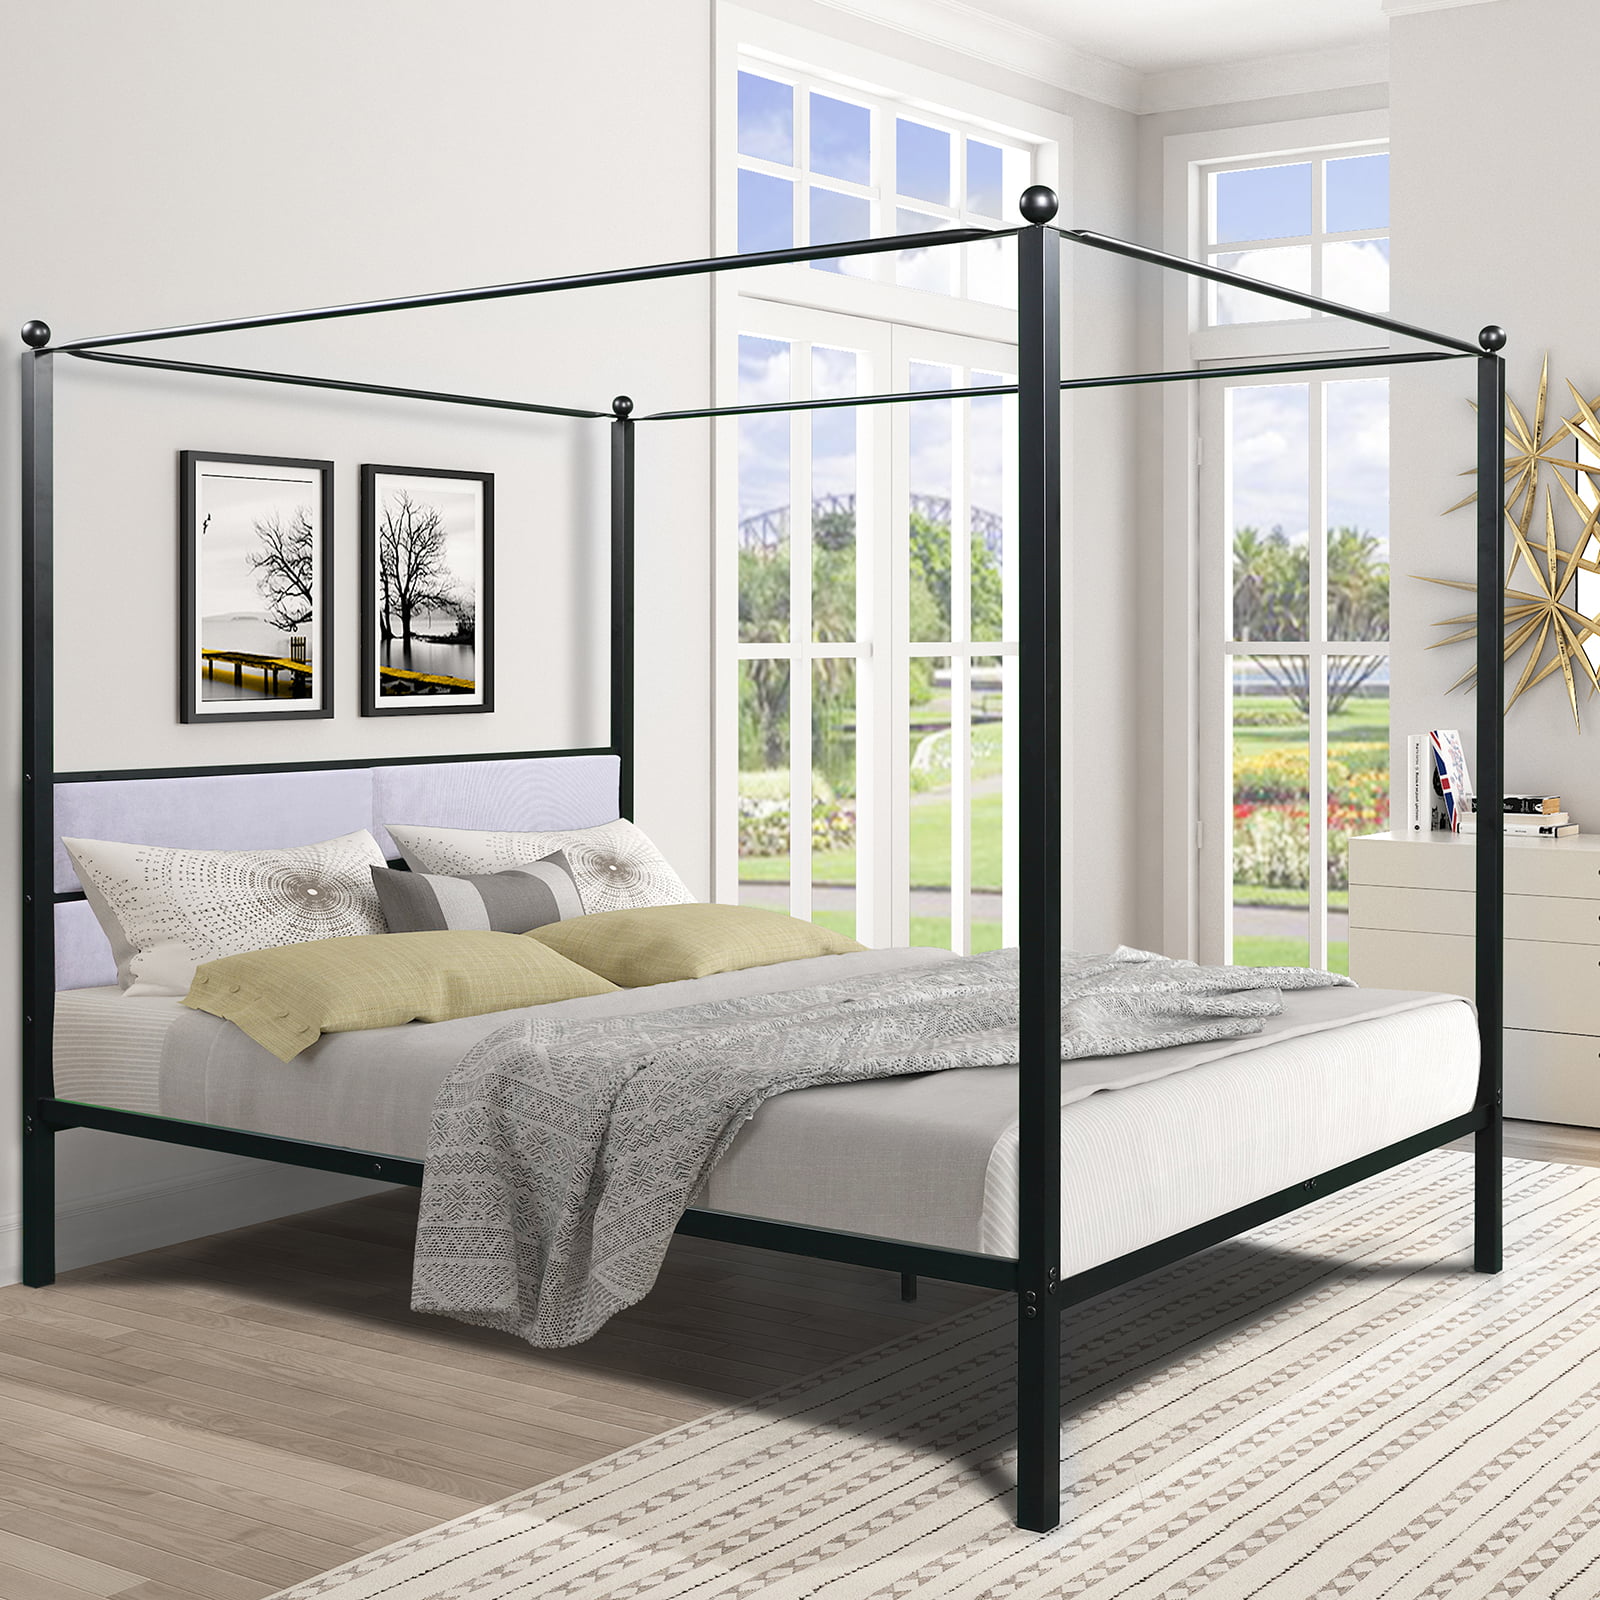 Beyamis Queen Canopy Bed Black Metal 4, How To Make A Four Post Bed Frame